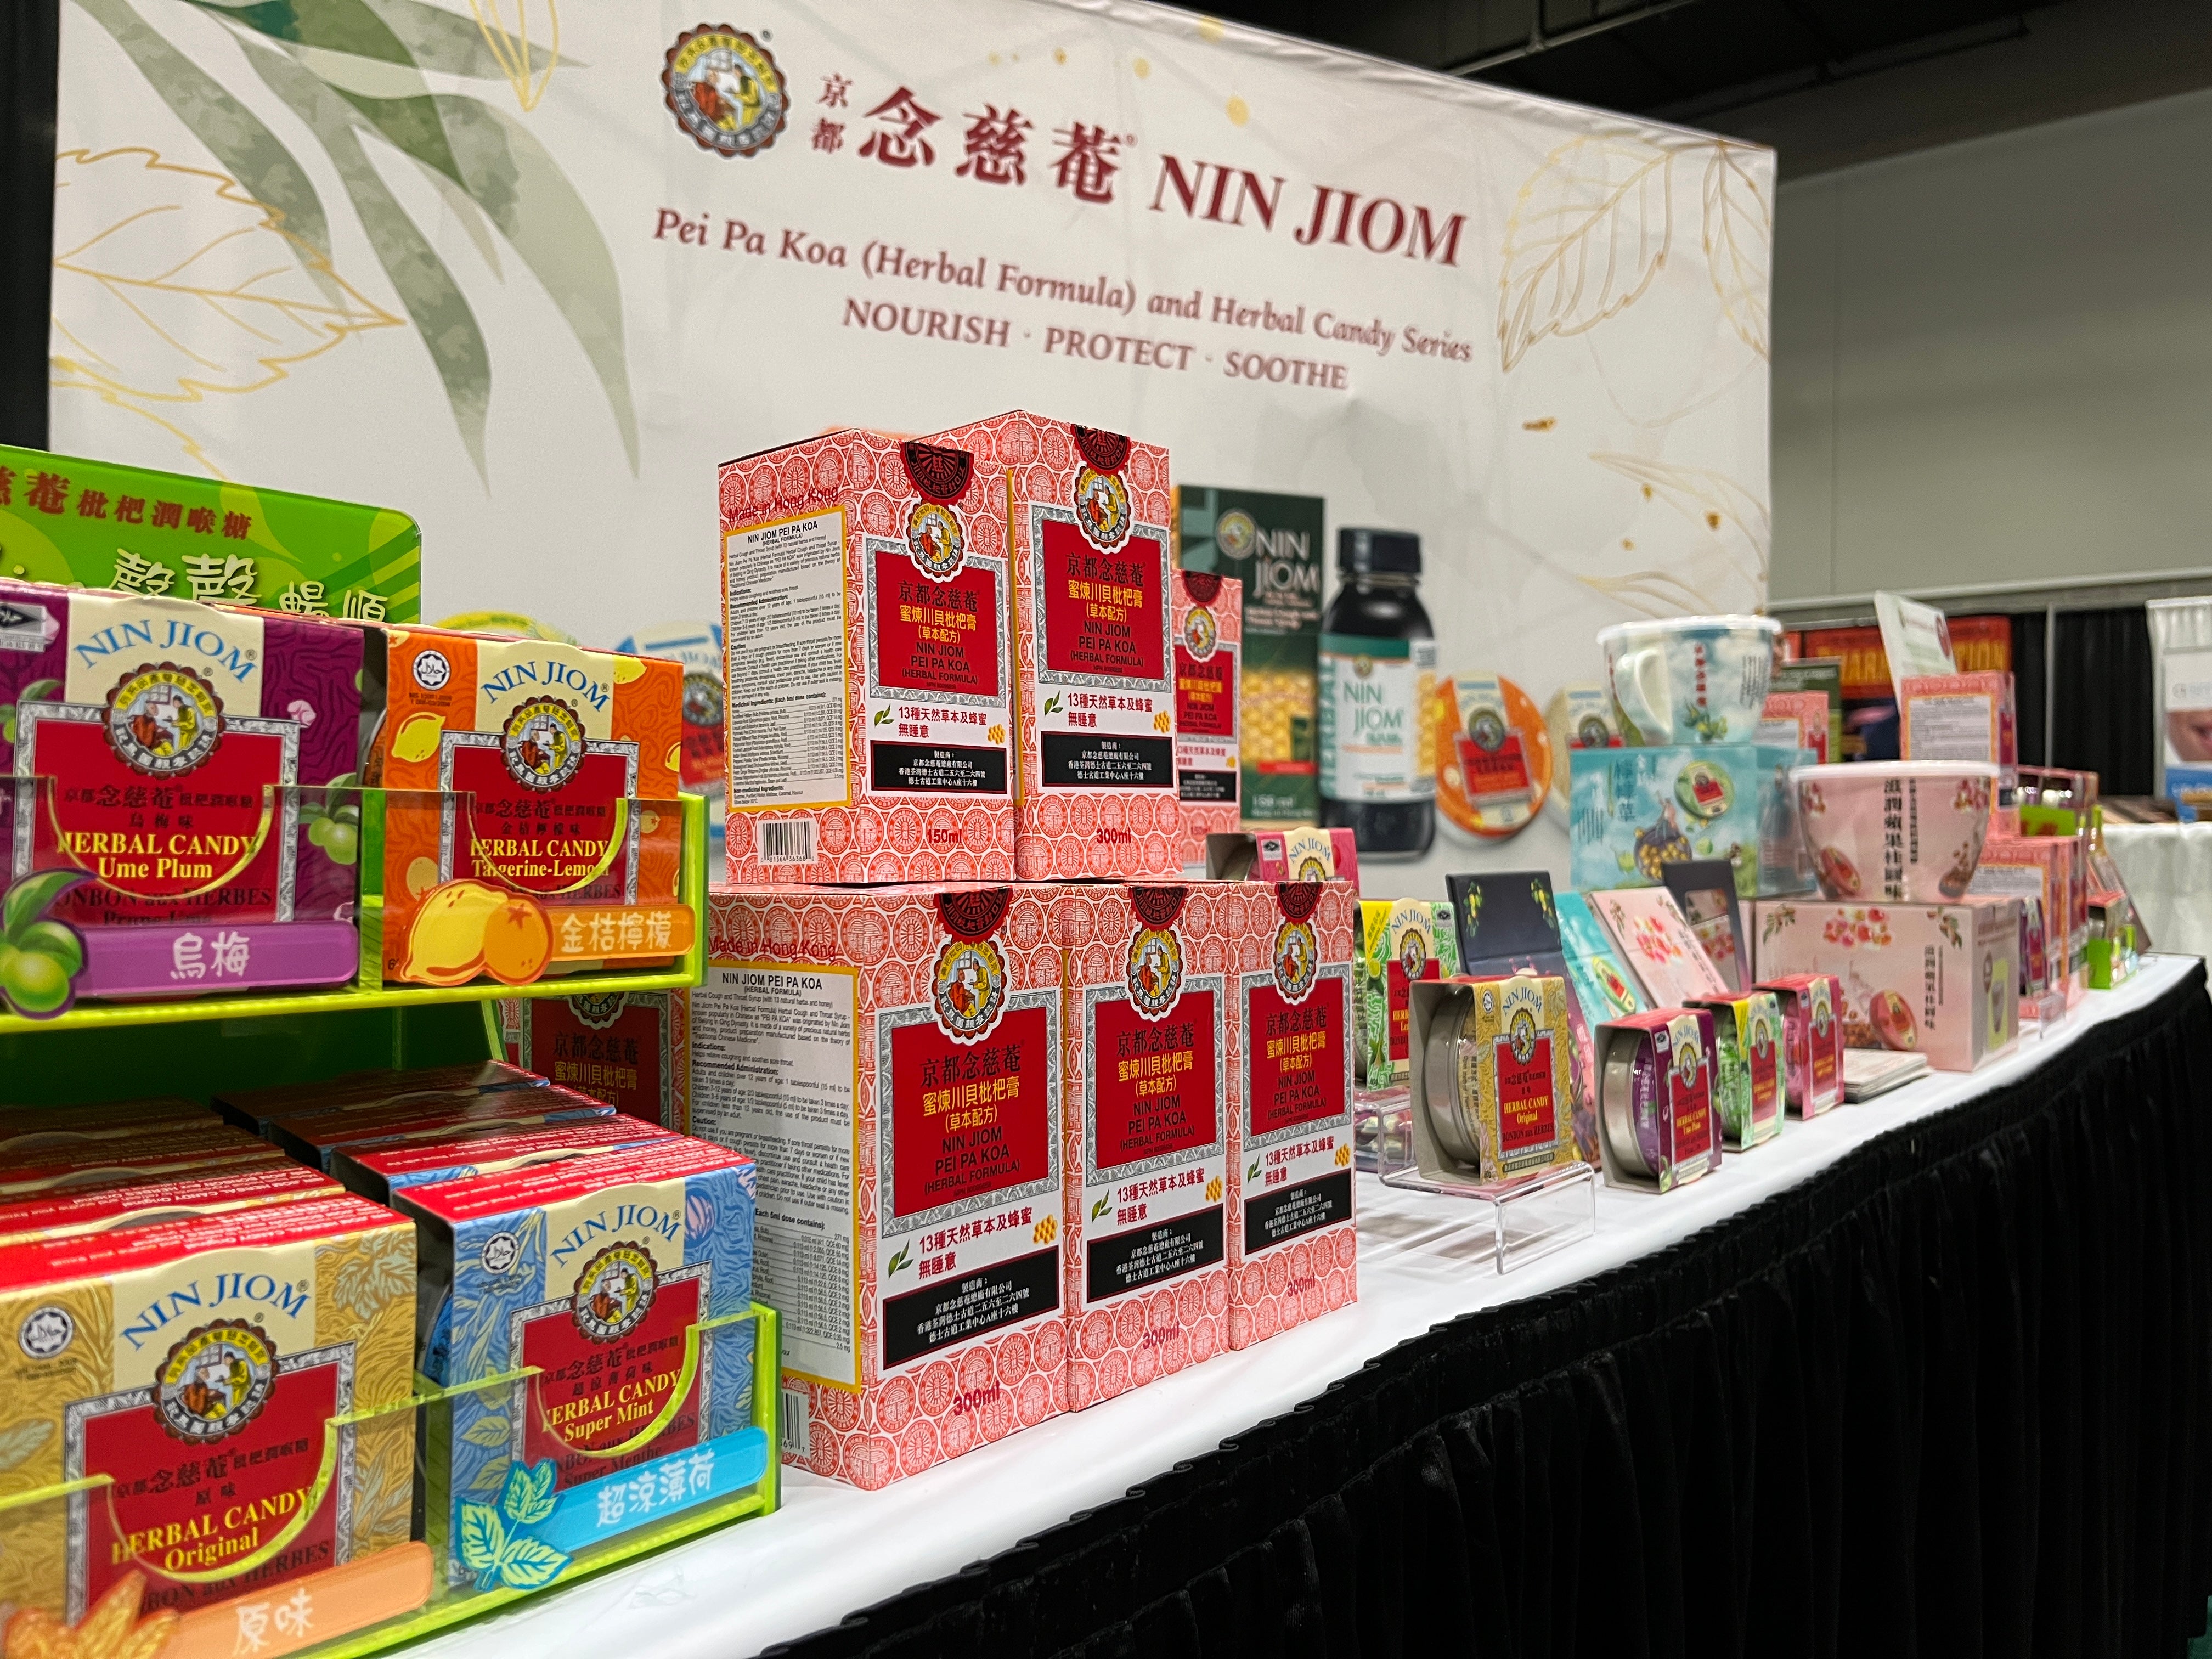 Nin Jiom Showcases Best-Selling Products at Vancouver Wellness Show